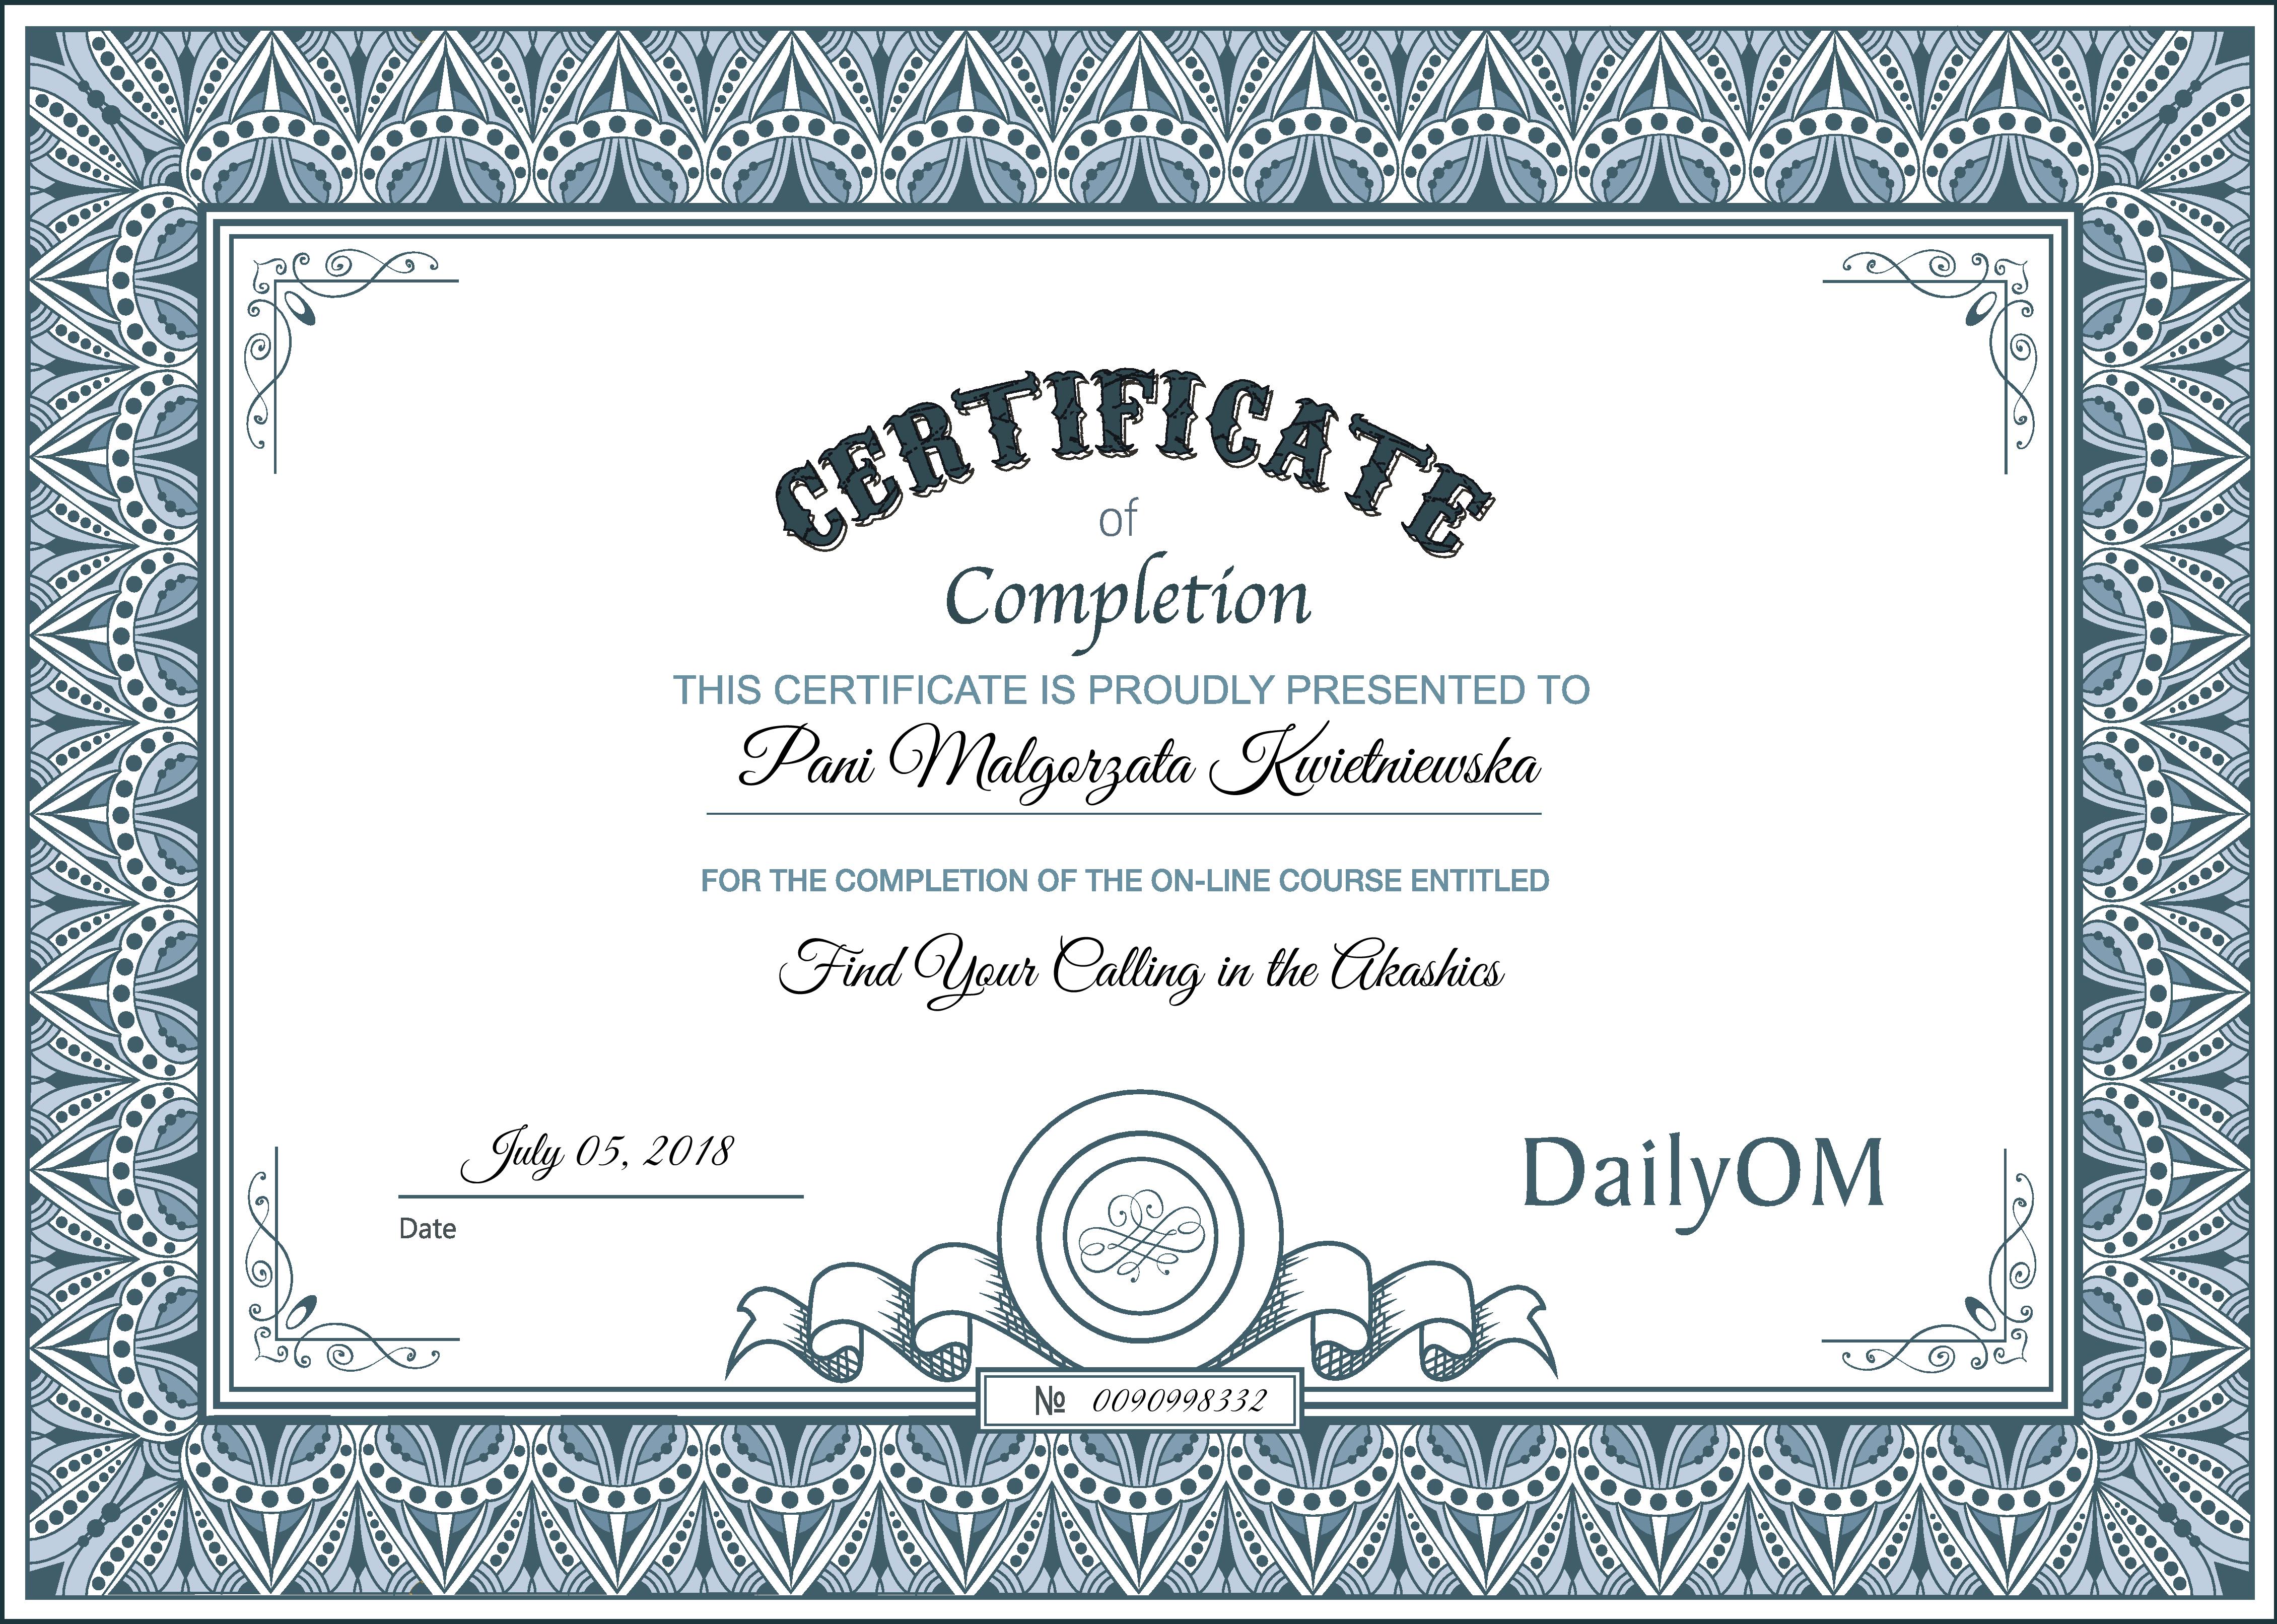 DailyOM_Certificate Your Calling-page-001